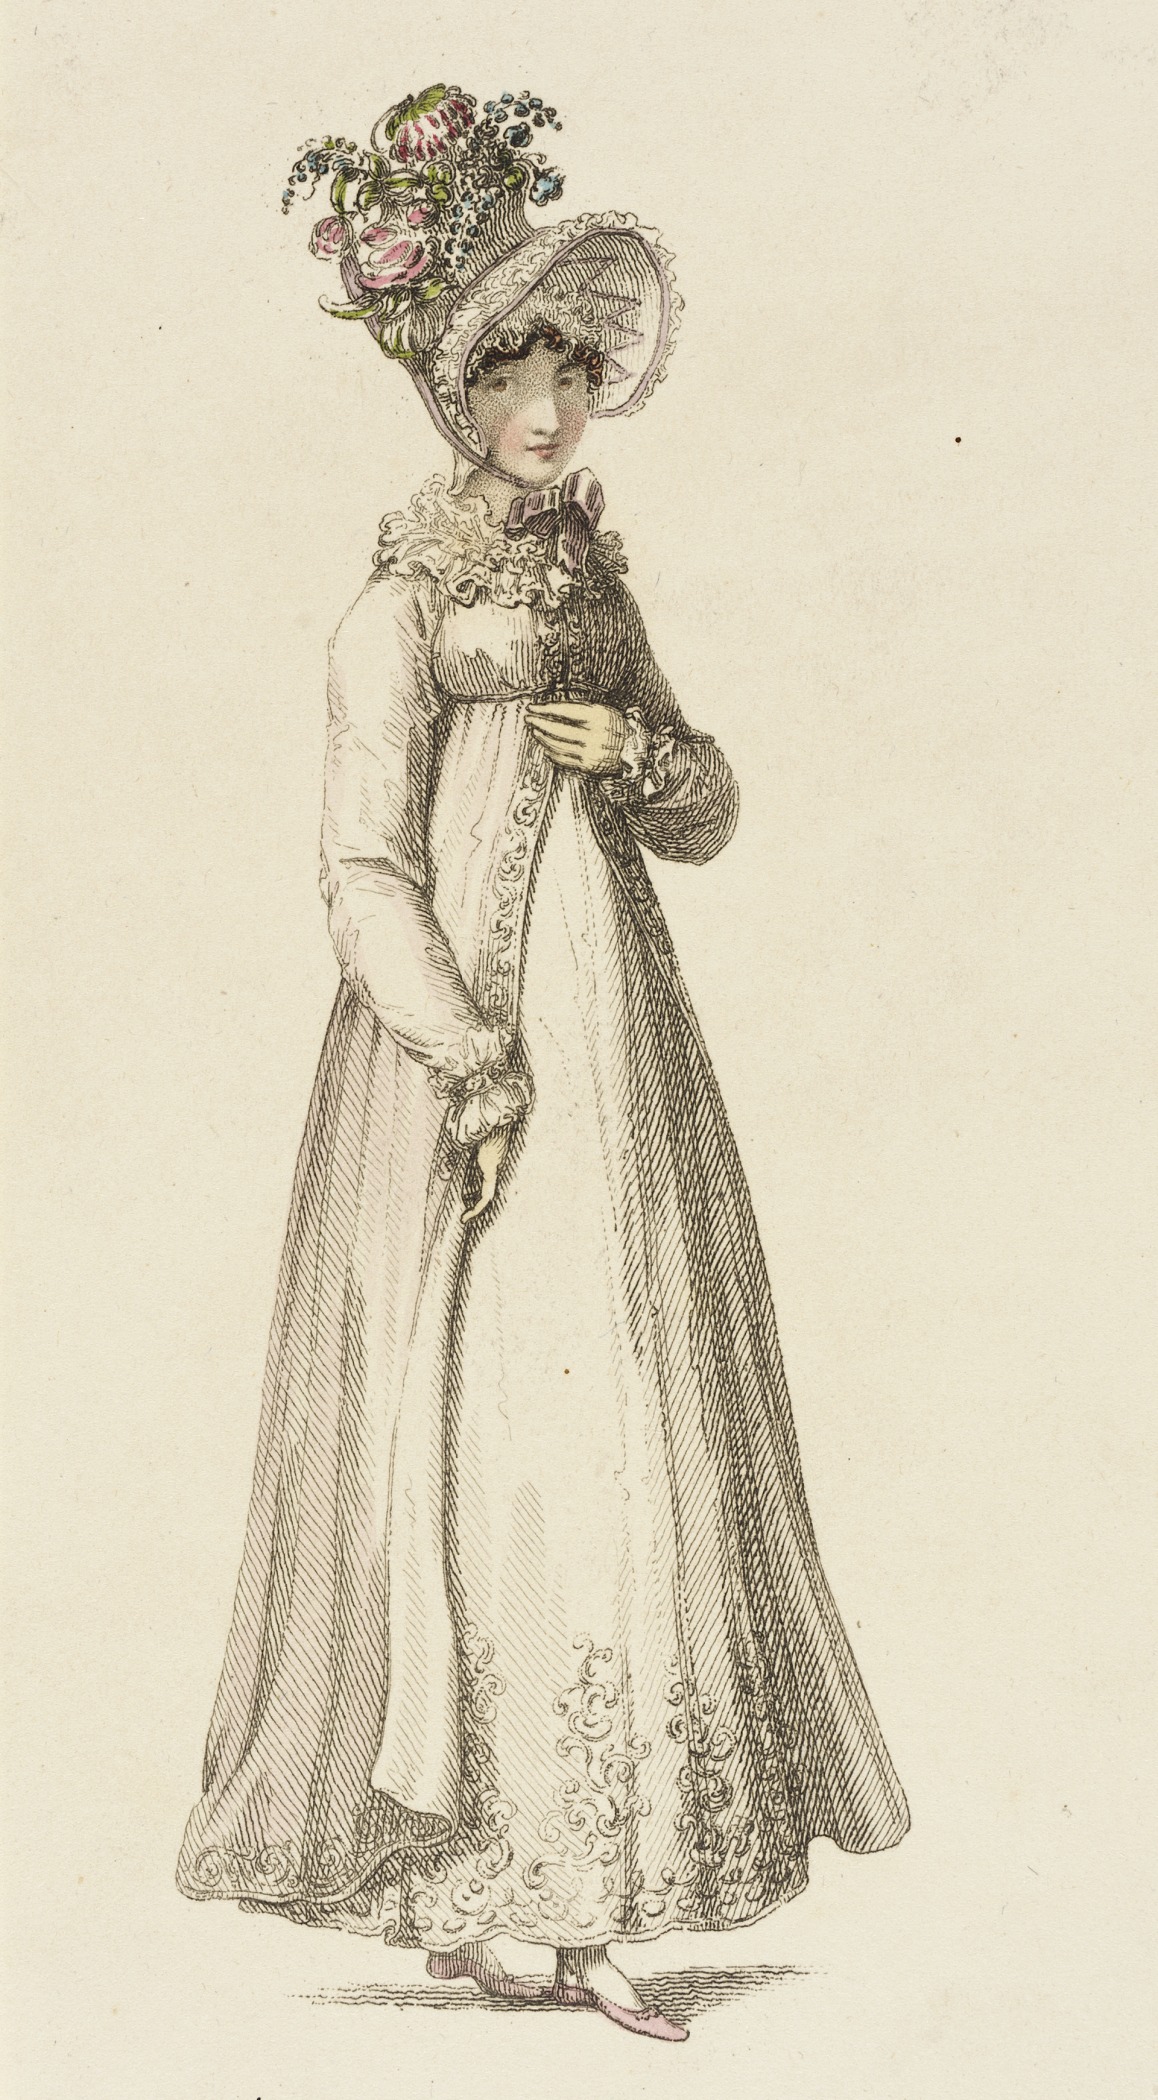 a woman wearing a dress with lace on top, holding a dog